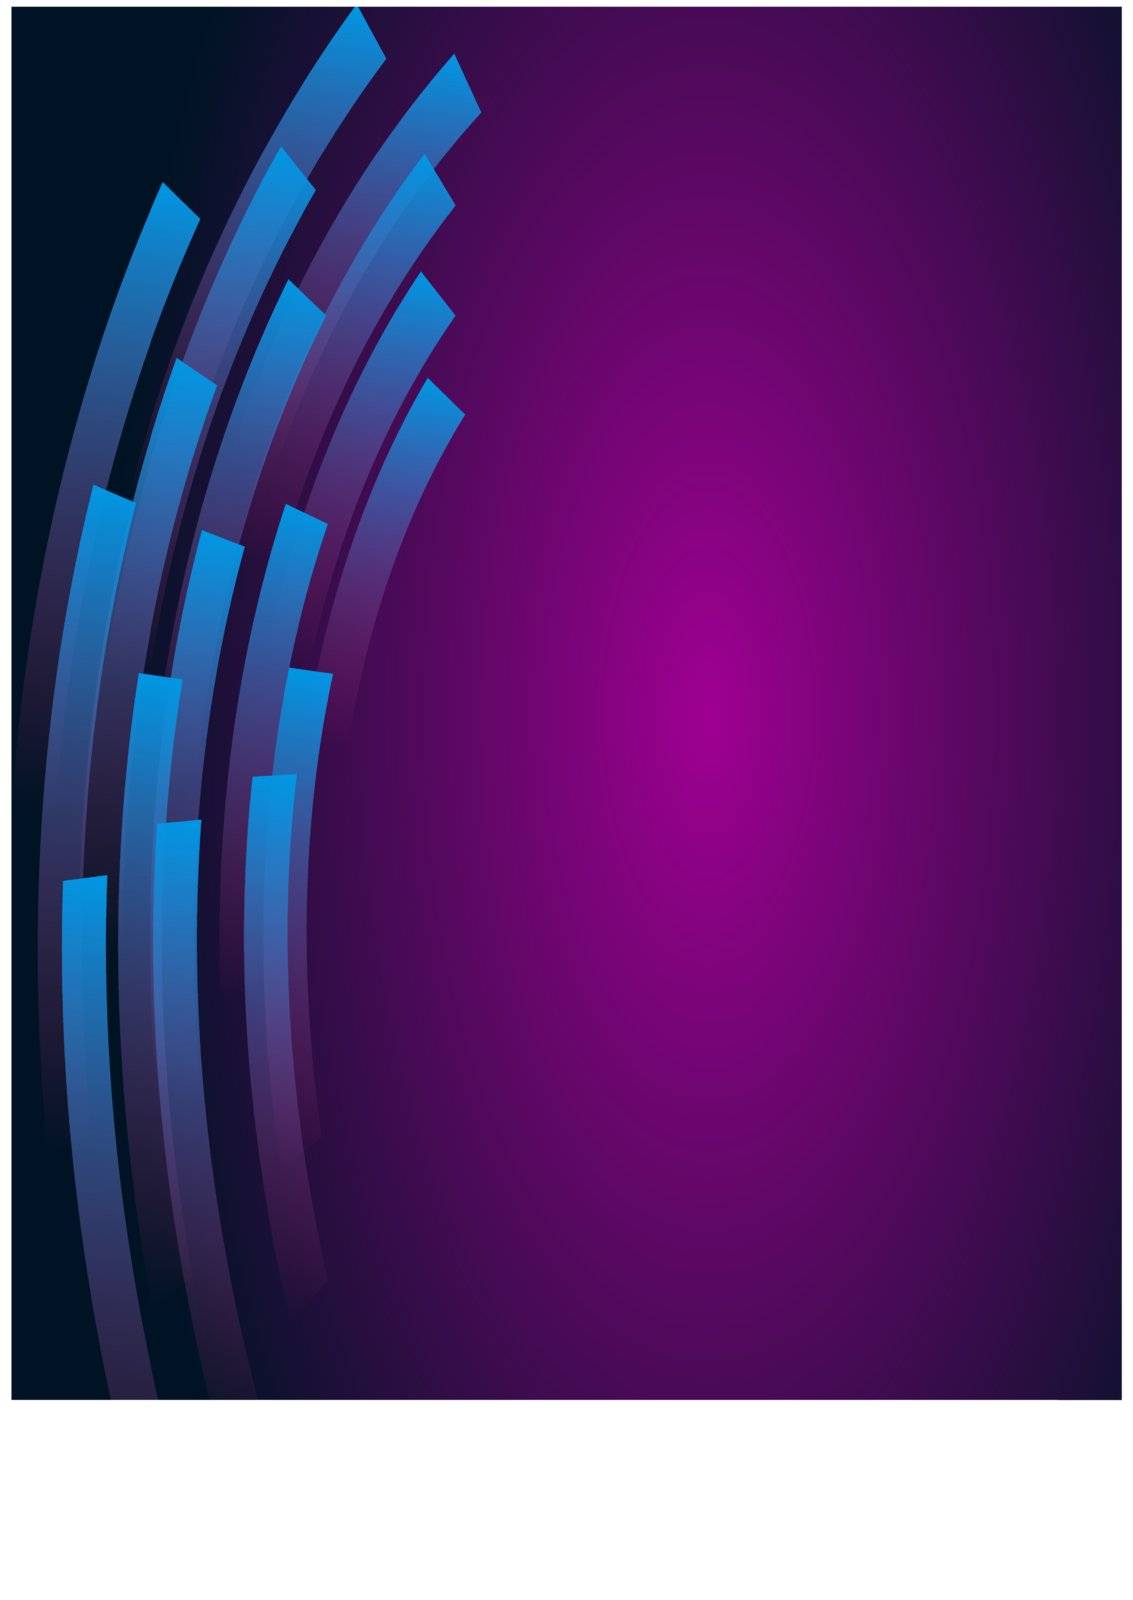 Blue lines abstraction with vibrant purple background.